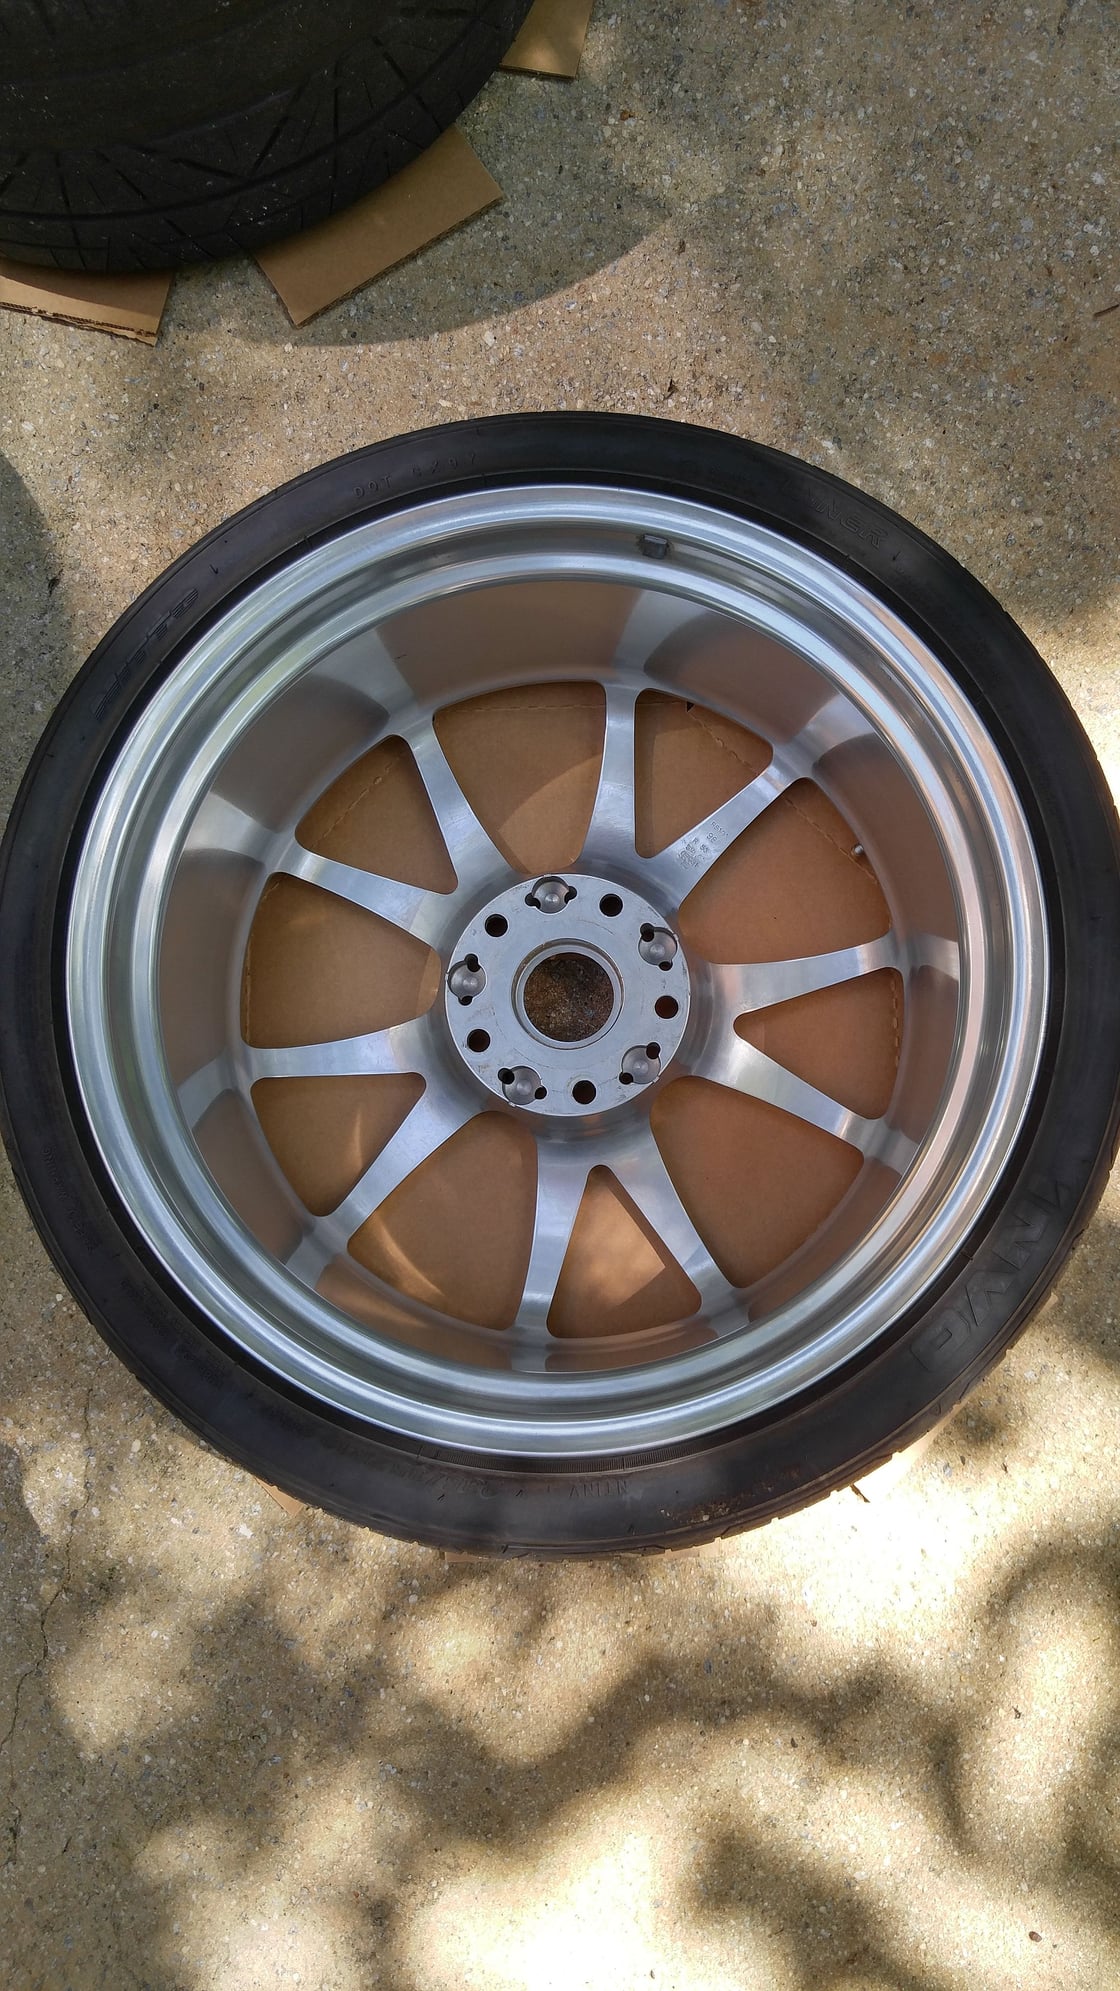 Wheels and Tires/Axles - FS: NLA 19" Champion RS171 wheels in NB fitment - fully polished & clear powdercoated - Used - 1999 to 2019 Porsche Carrera - Seneca, SC 29672, United States